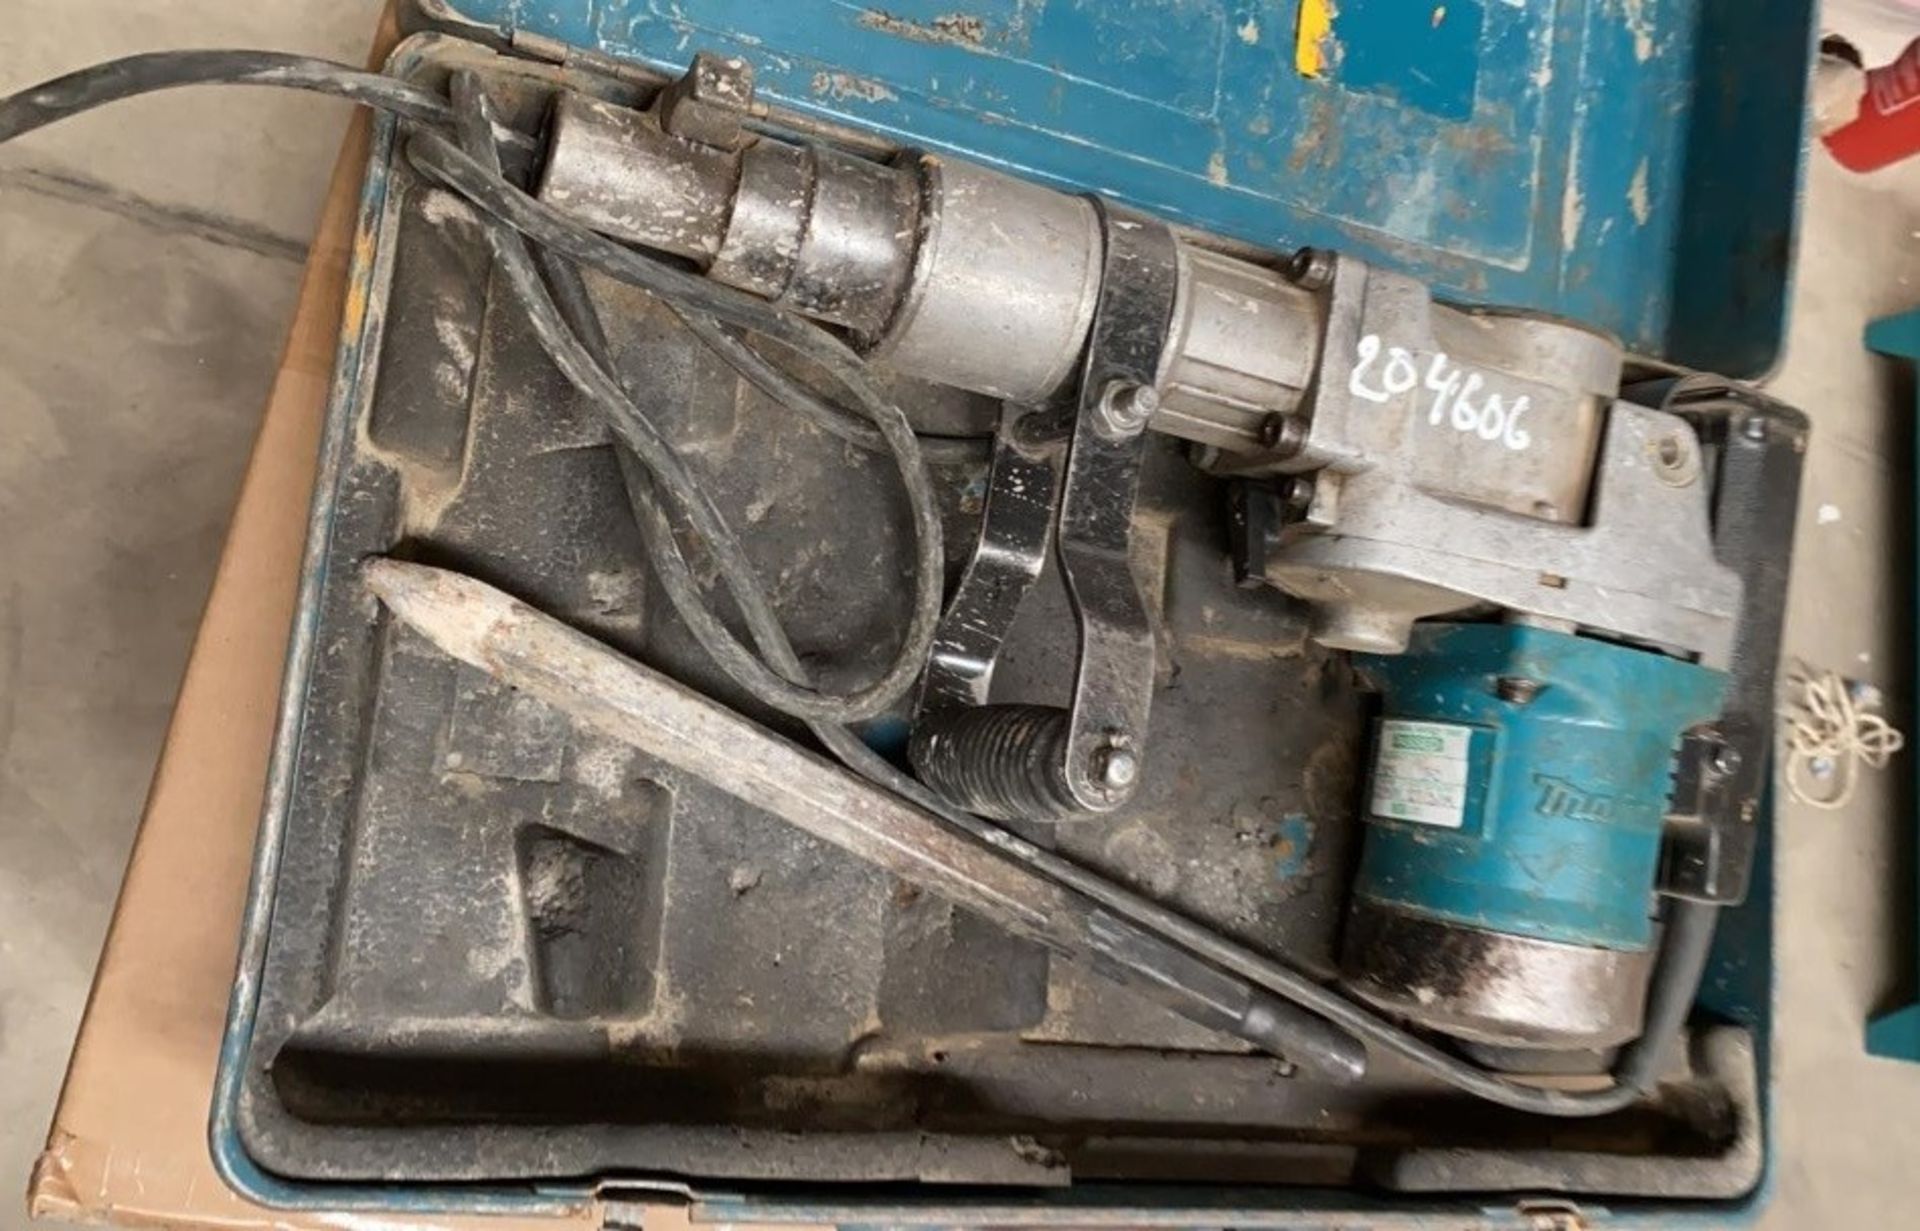 1 x Makita 110V High Impact Drill - Used, Recently Removed From A Working Site - CL505 - Ref: - Image 4 of 4